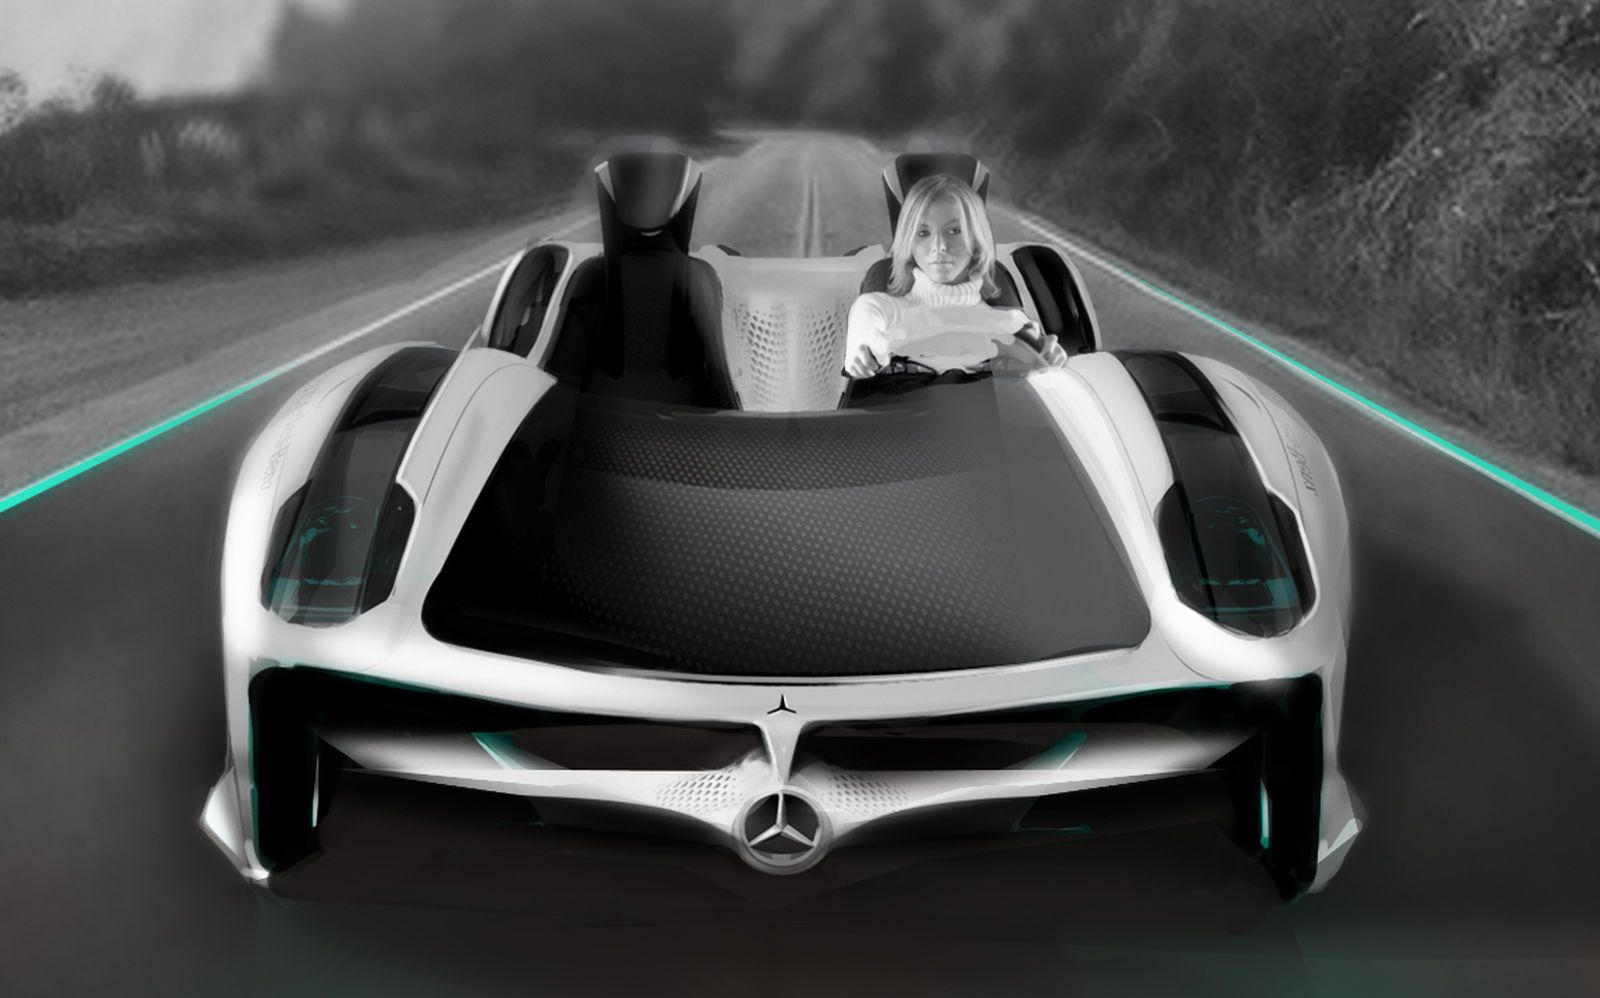 Amazing futuristic car designs from racing cars to rescue vehicles image 30